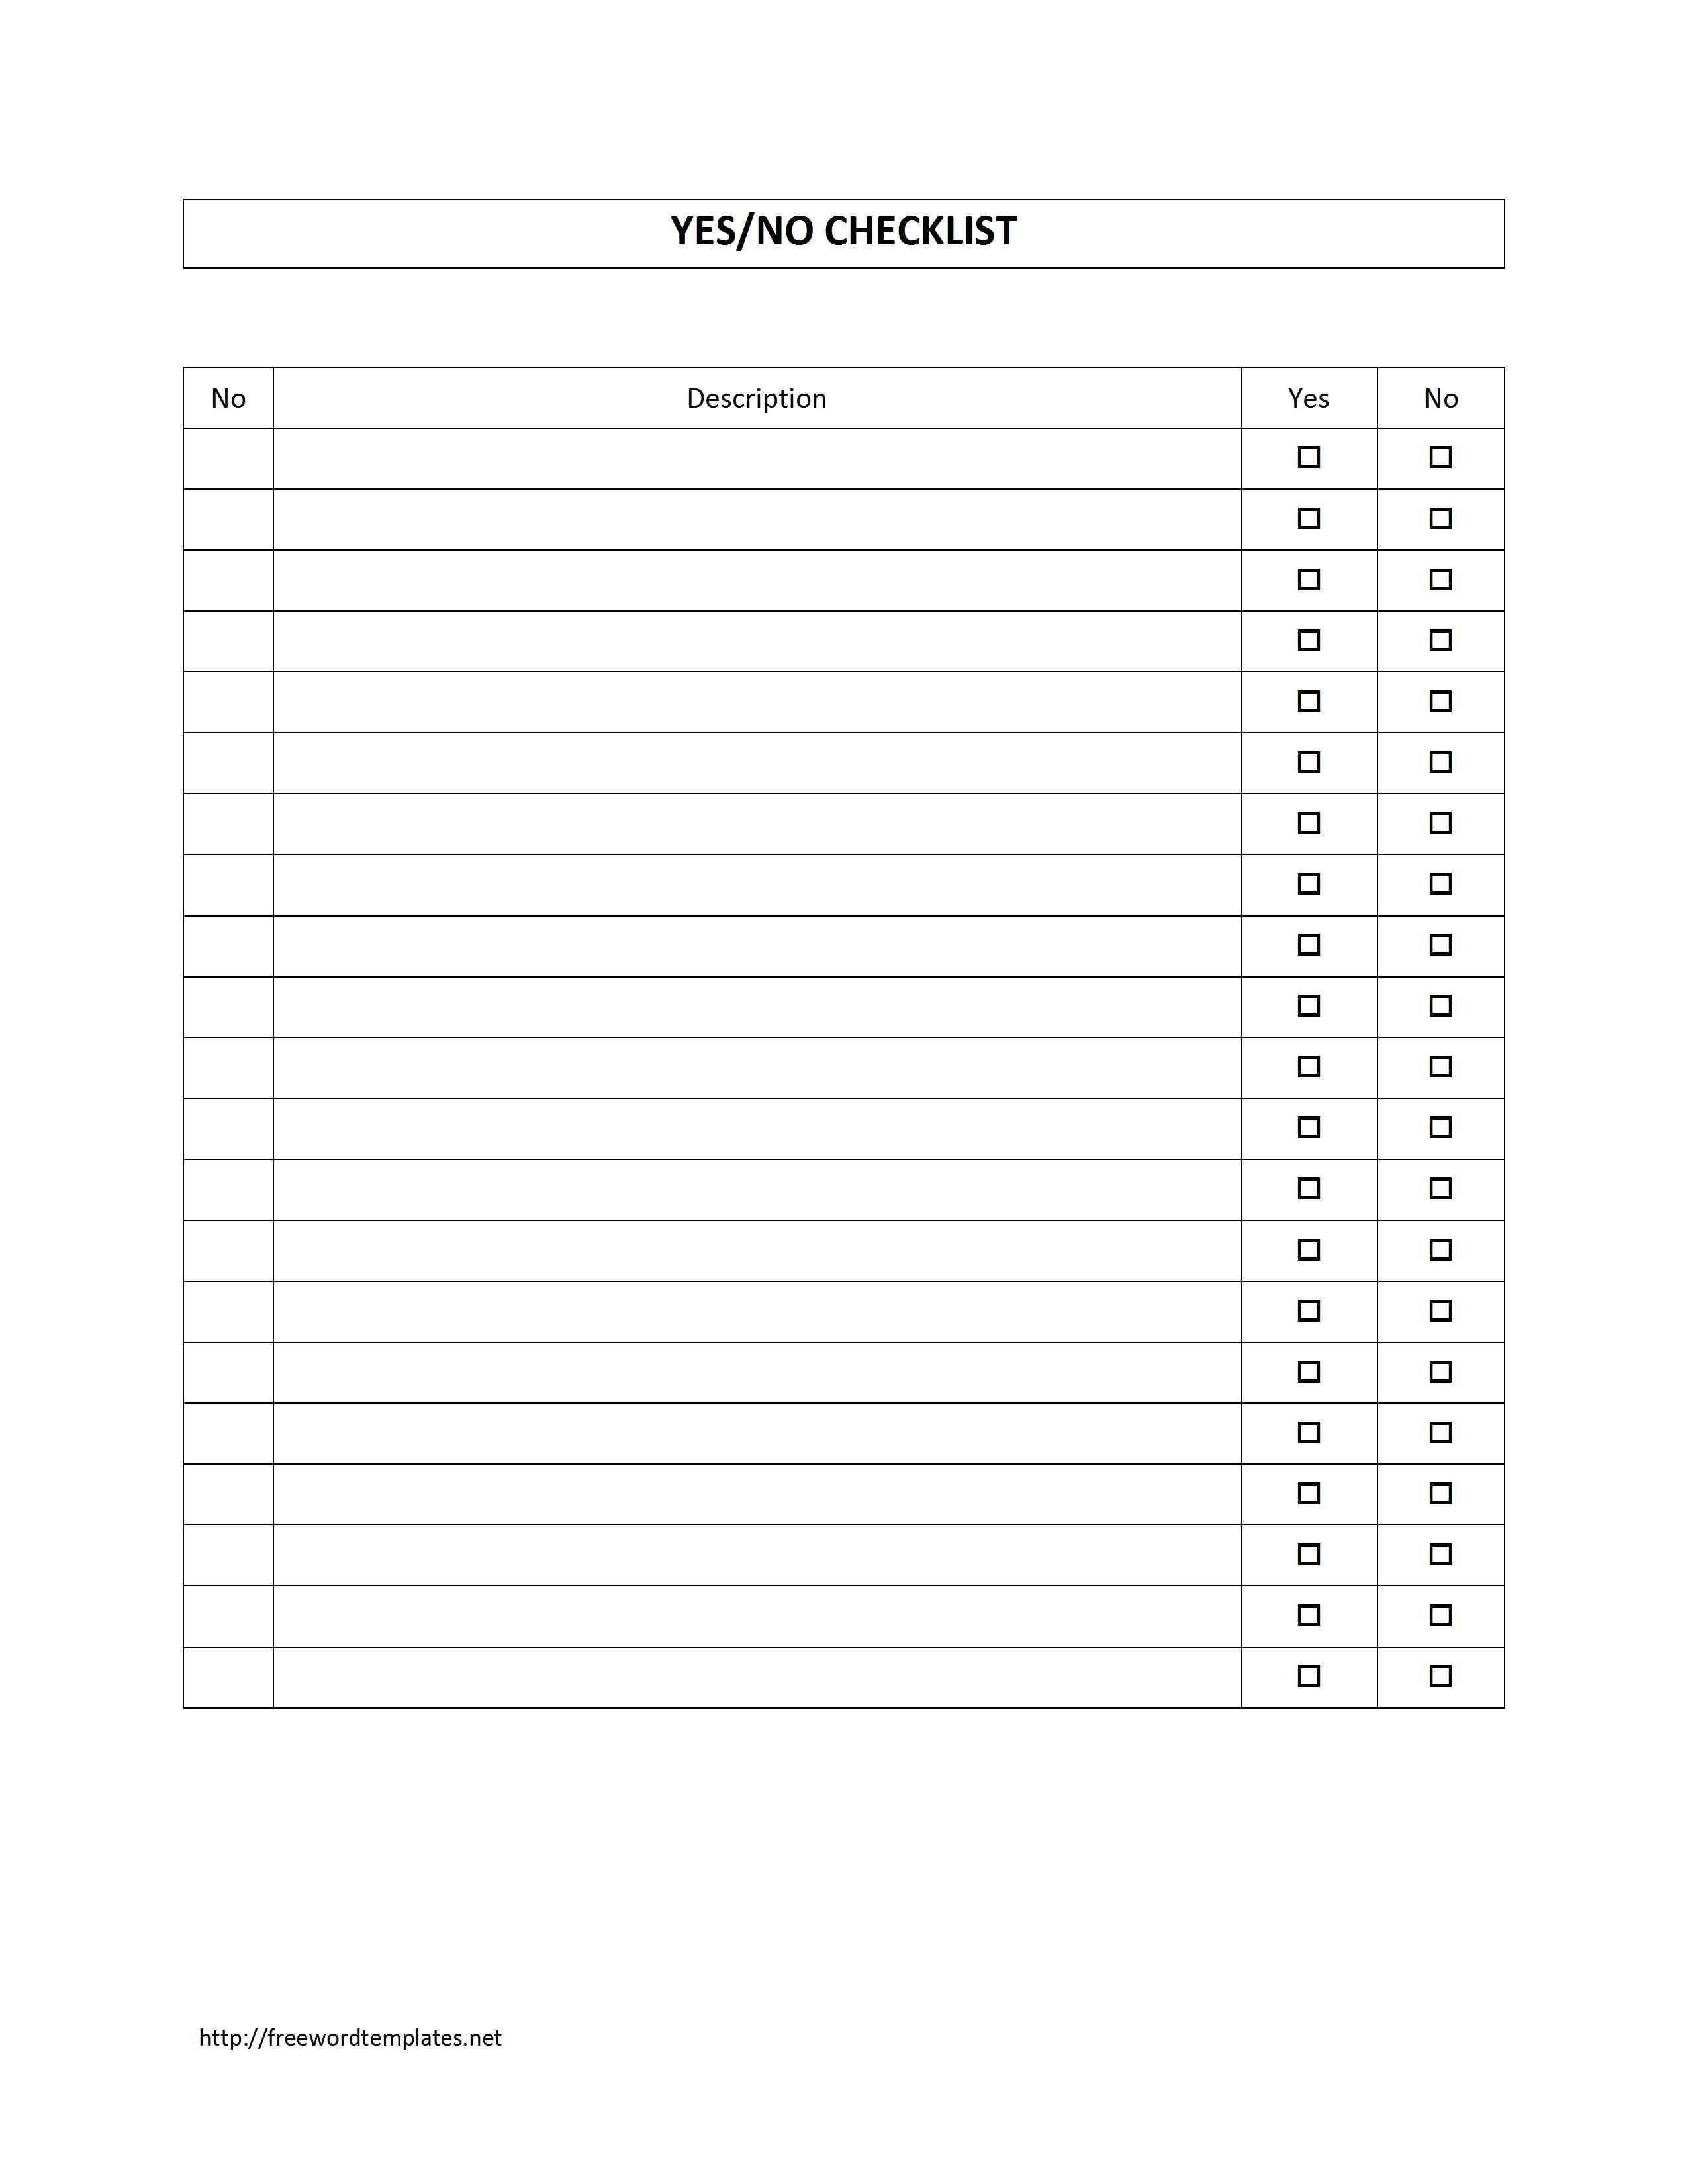 Survey Sheet With Yesno Checklist Template  Free Microsoft Word regarding Questionnaire Design Template Word